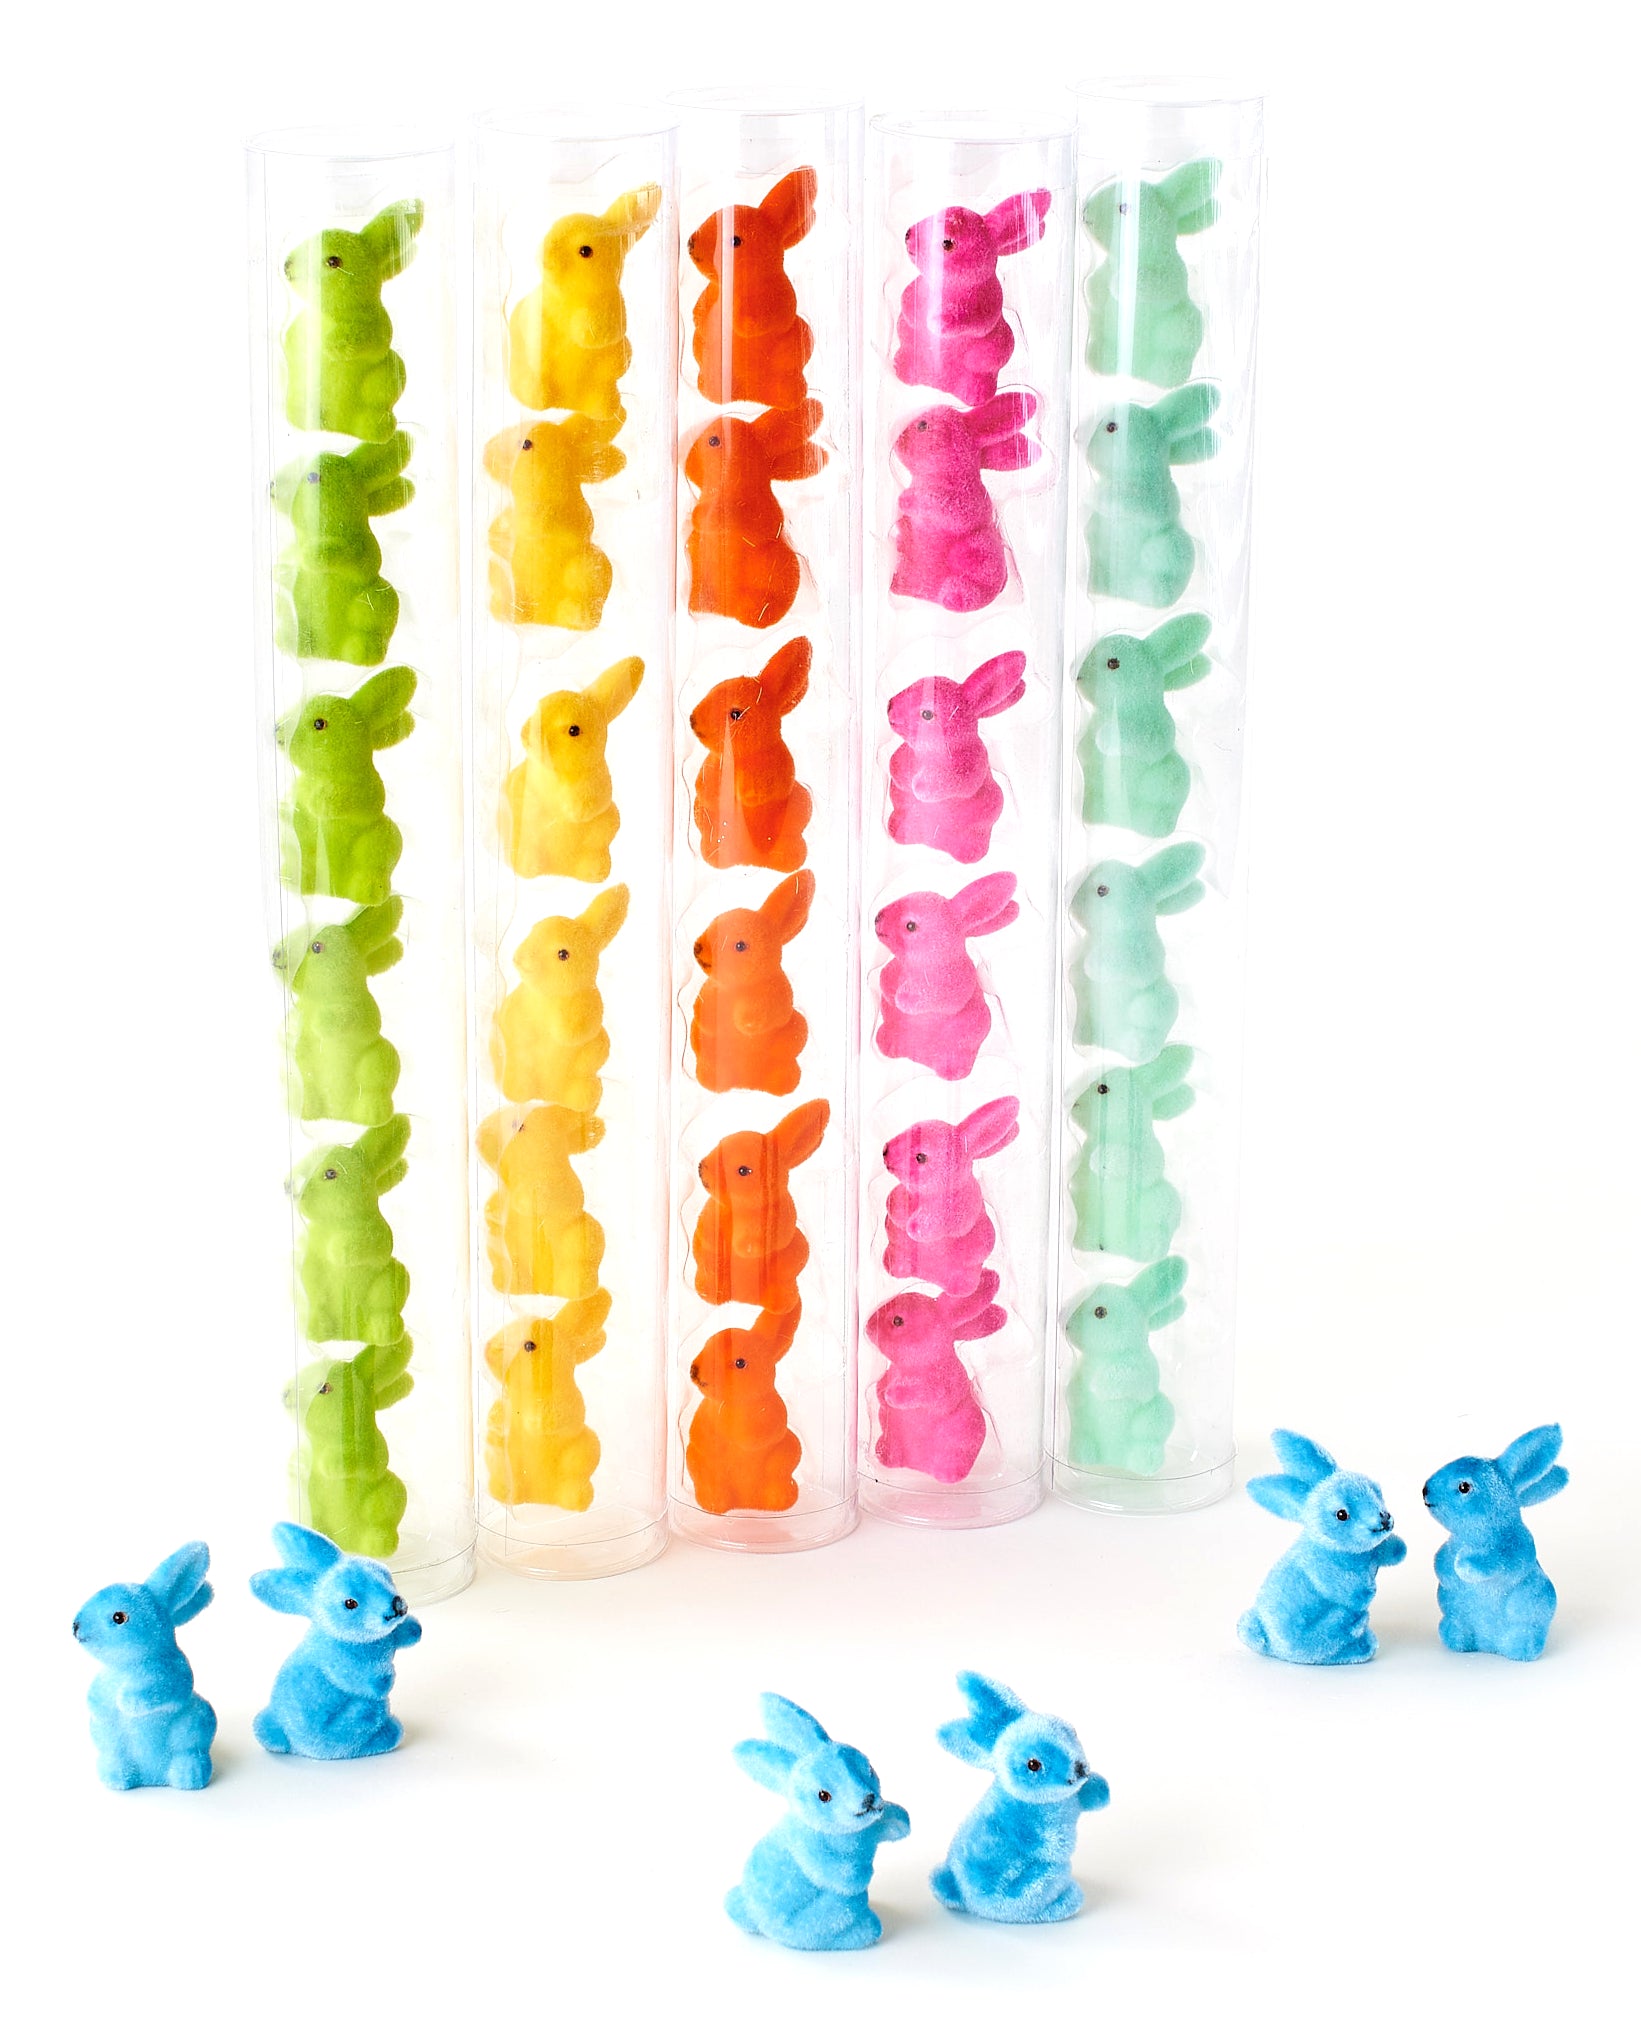 Colorful Flocked Bunny Rabbits